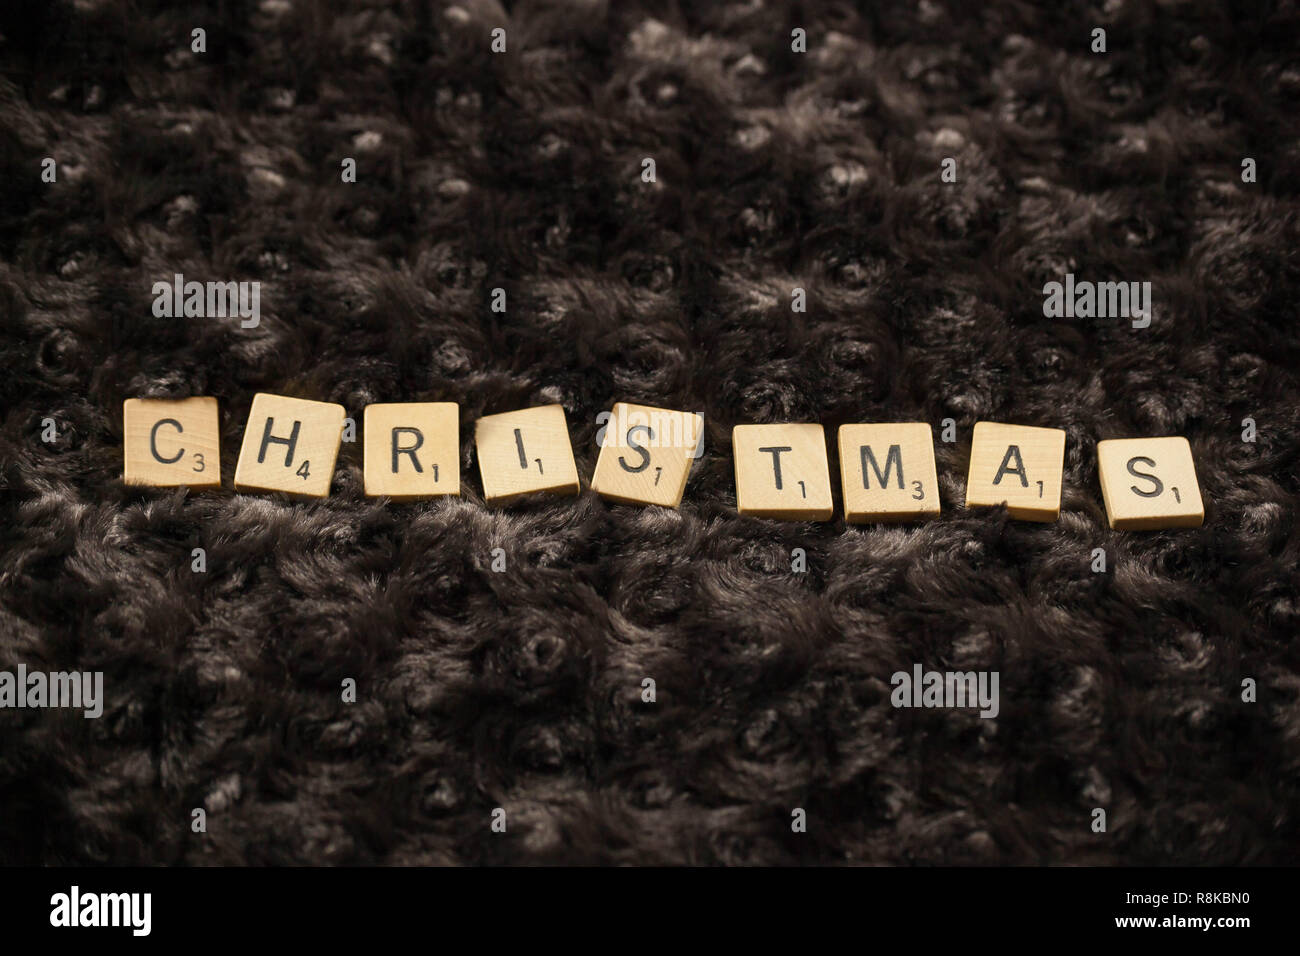 WOODBRIDGE, NEW JERSEY - November 9, 2018: Scrabble tiles spell out the word Christmas on a brown fur background Stock Photo